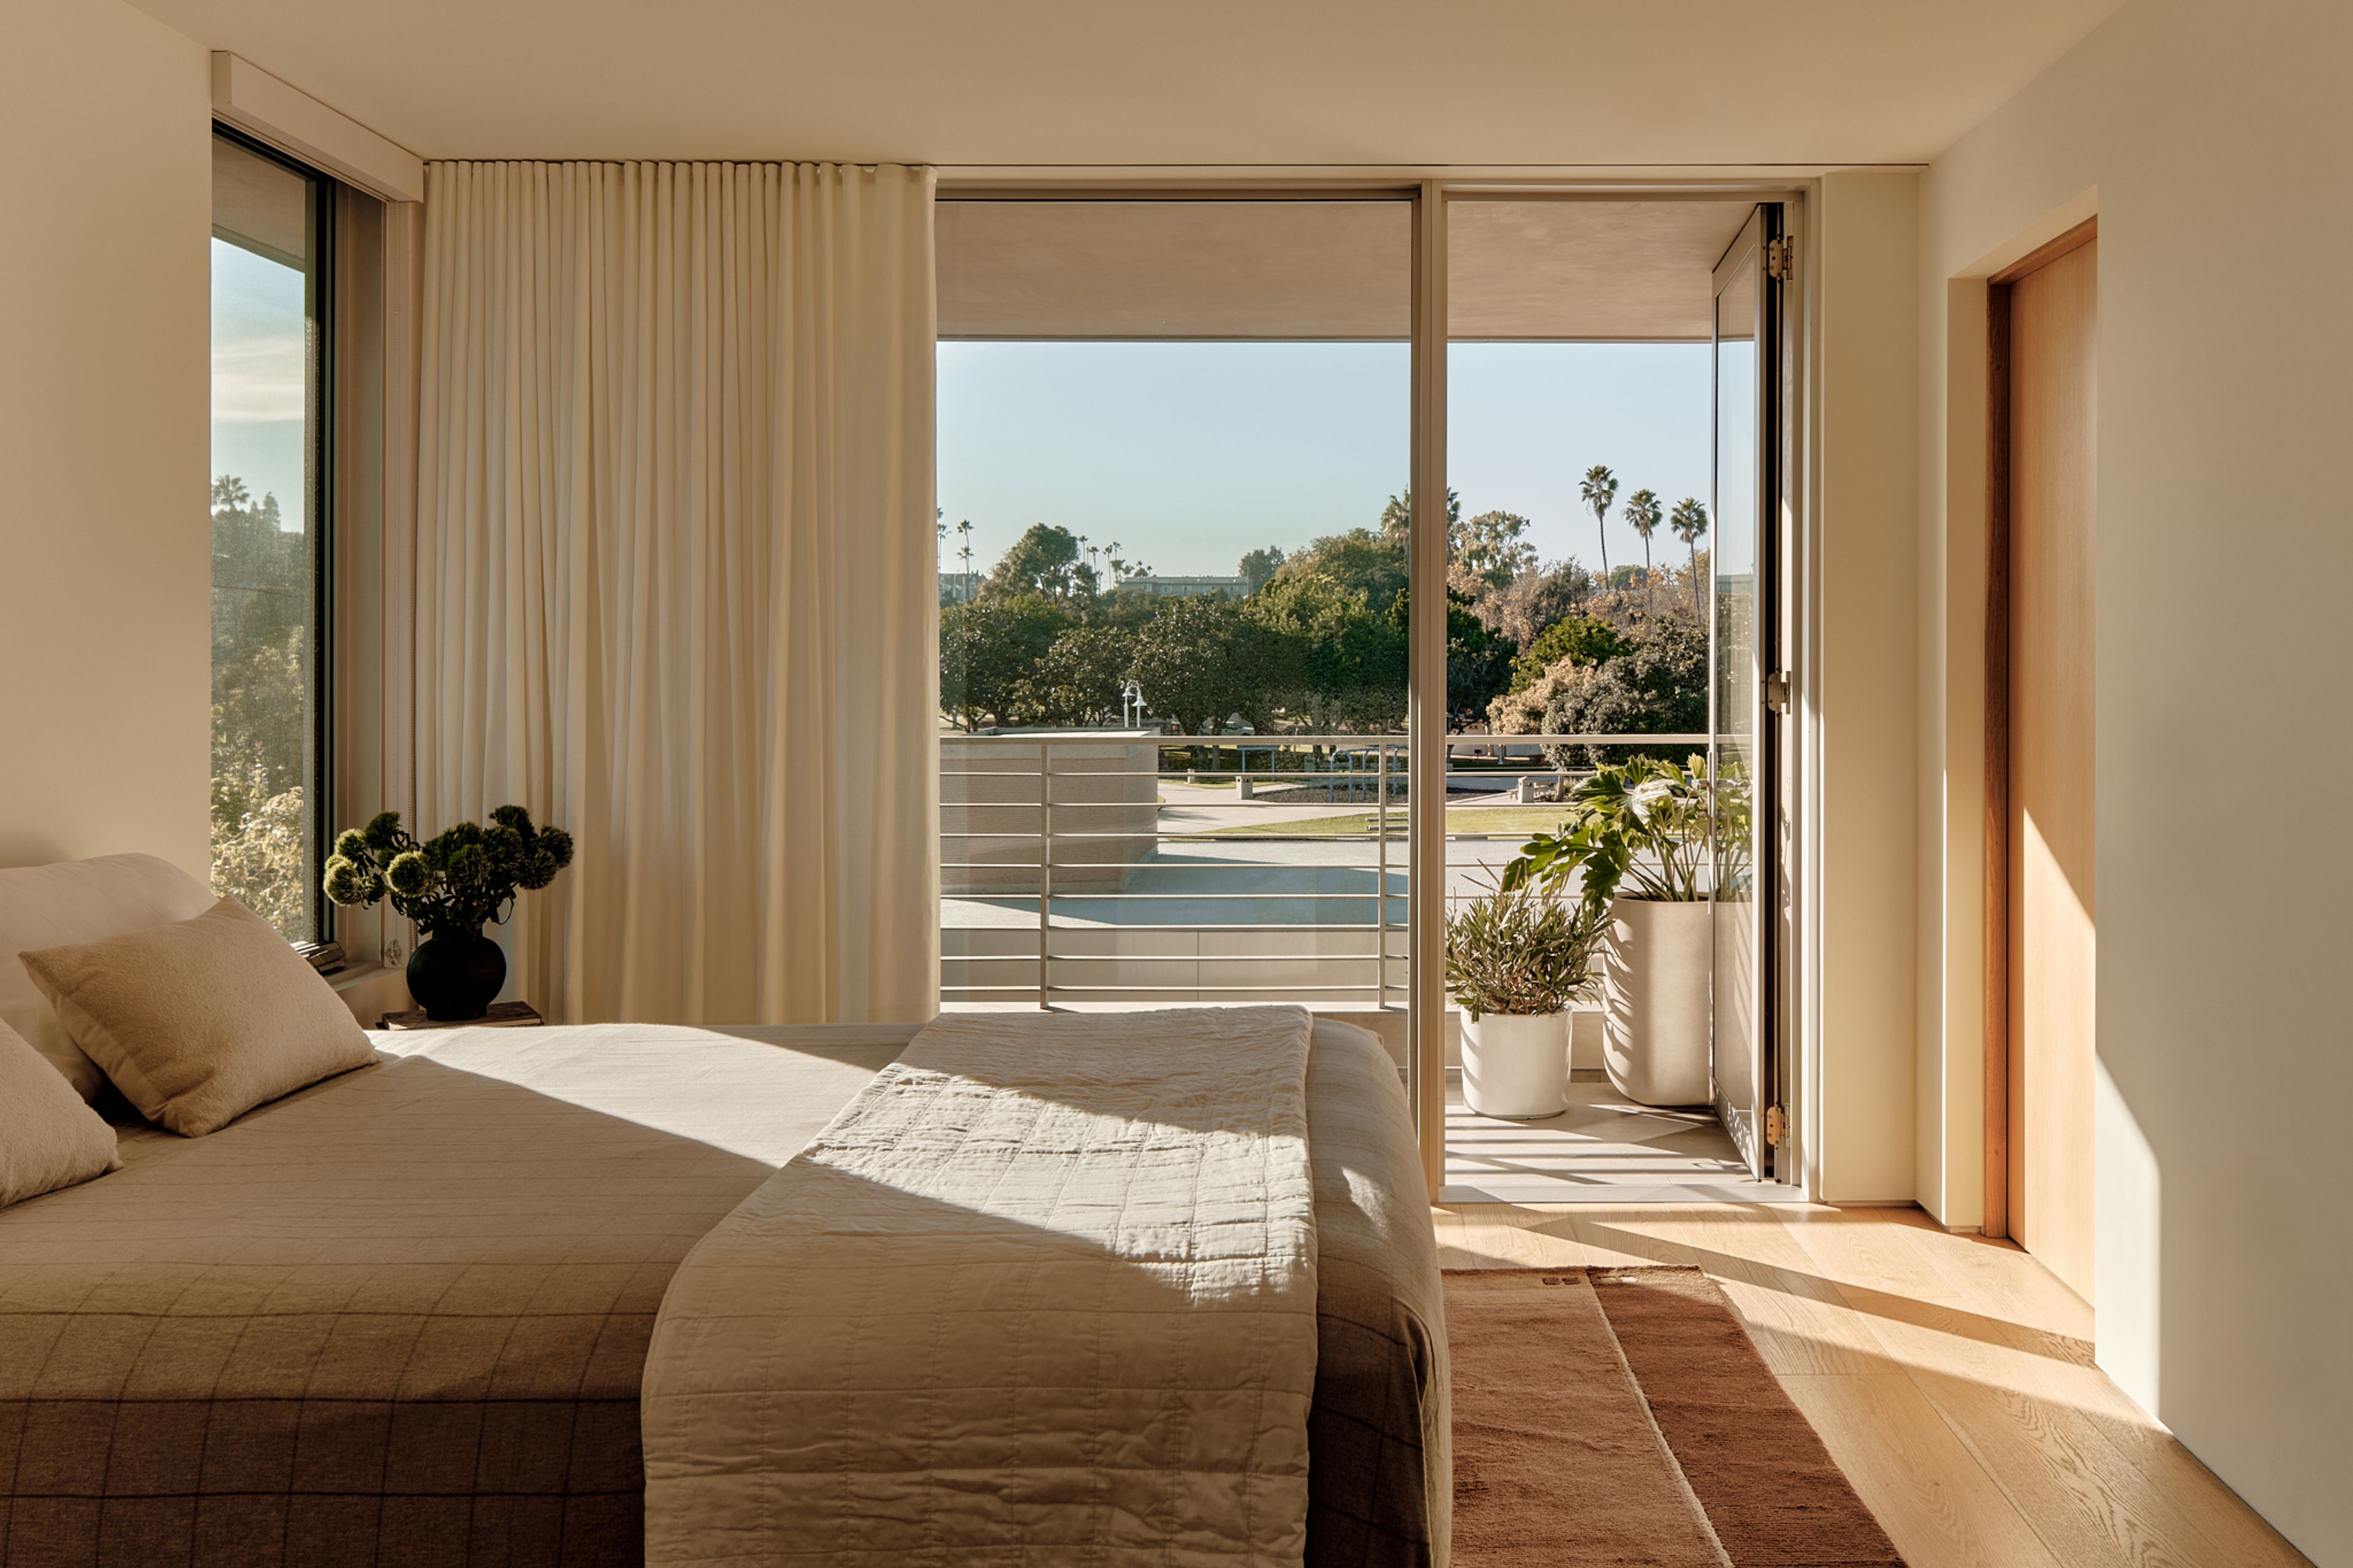 Guest suite overlooks views of the park